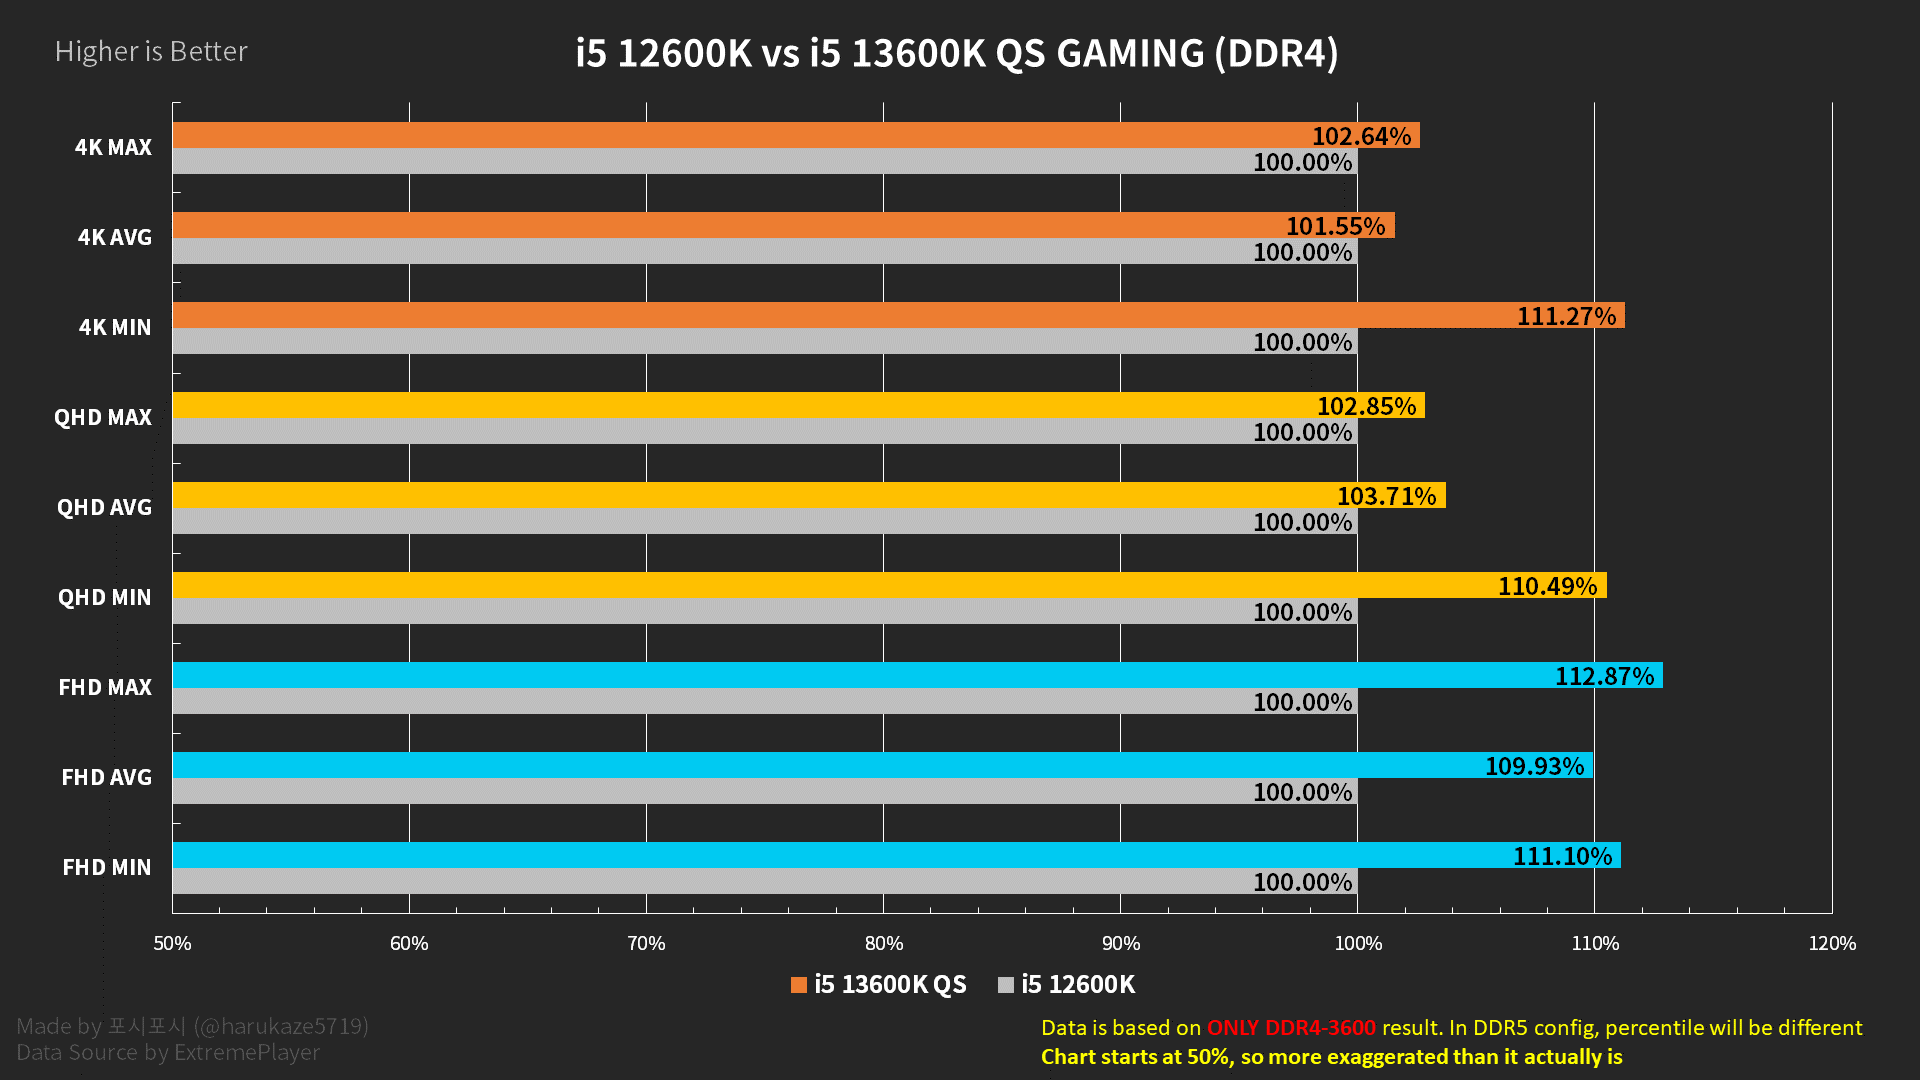 Core i5-12600K vs. Core i5-13600K (ES) with DDR4 and DDR5